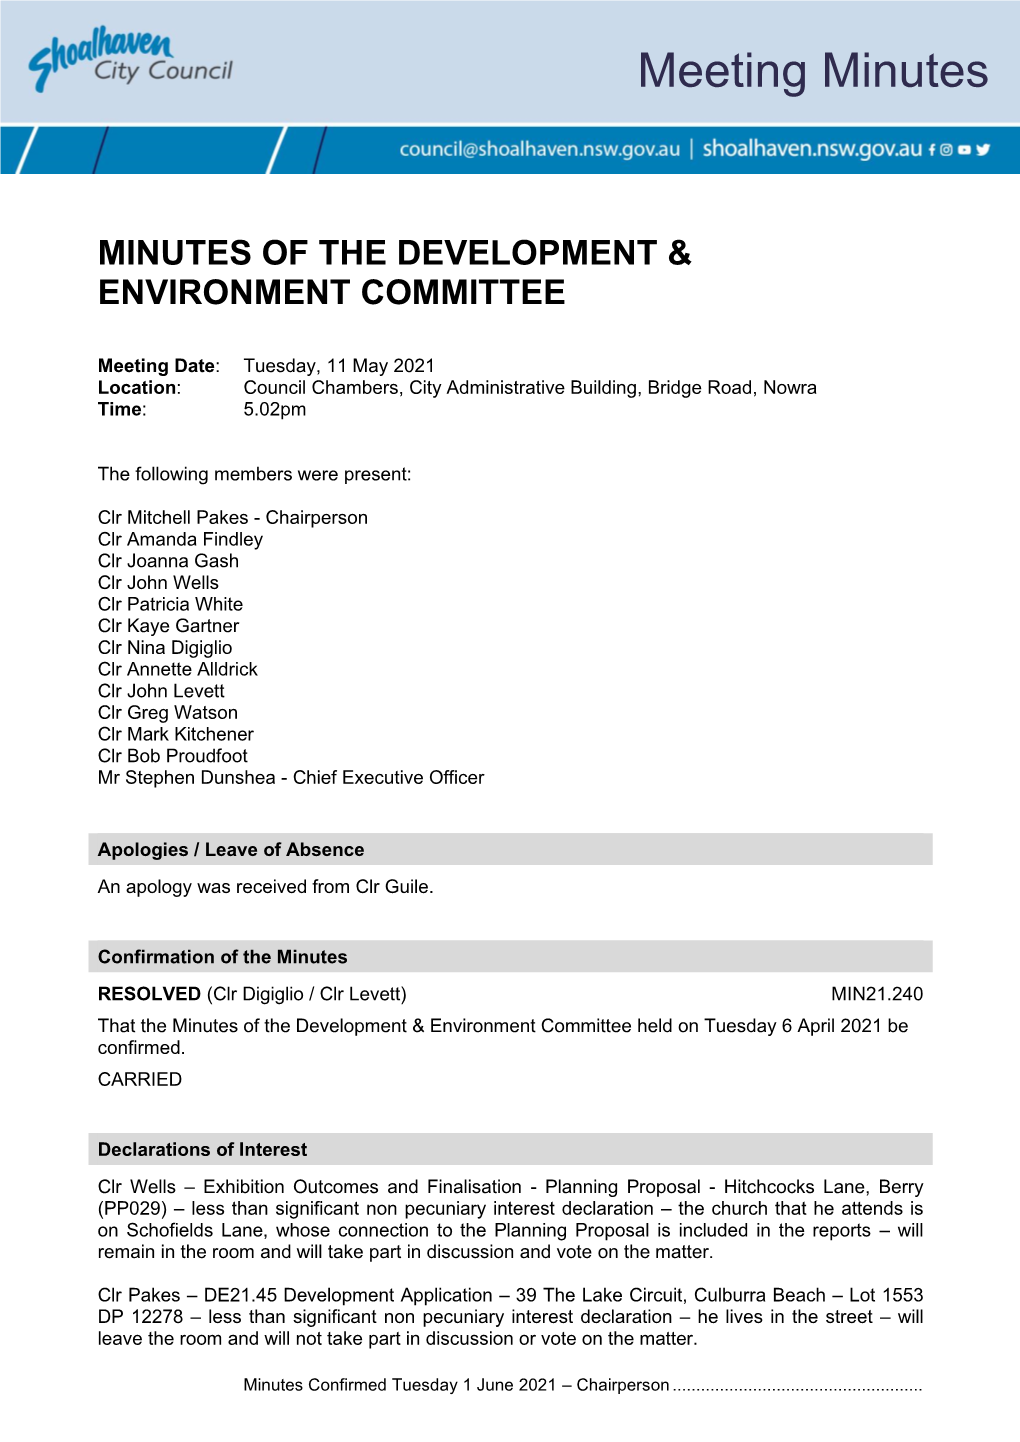 Minutes of Development & Environment Committee